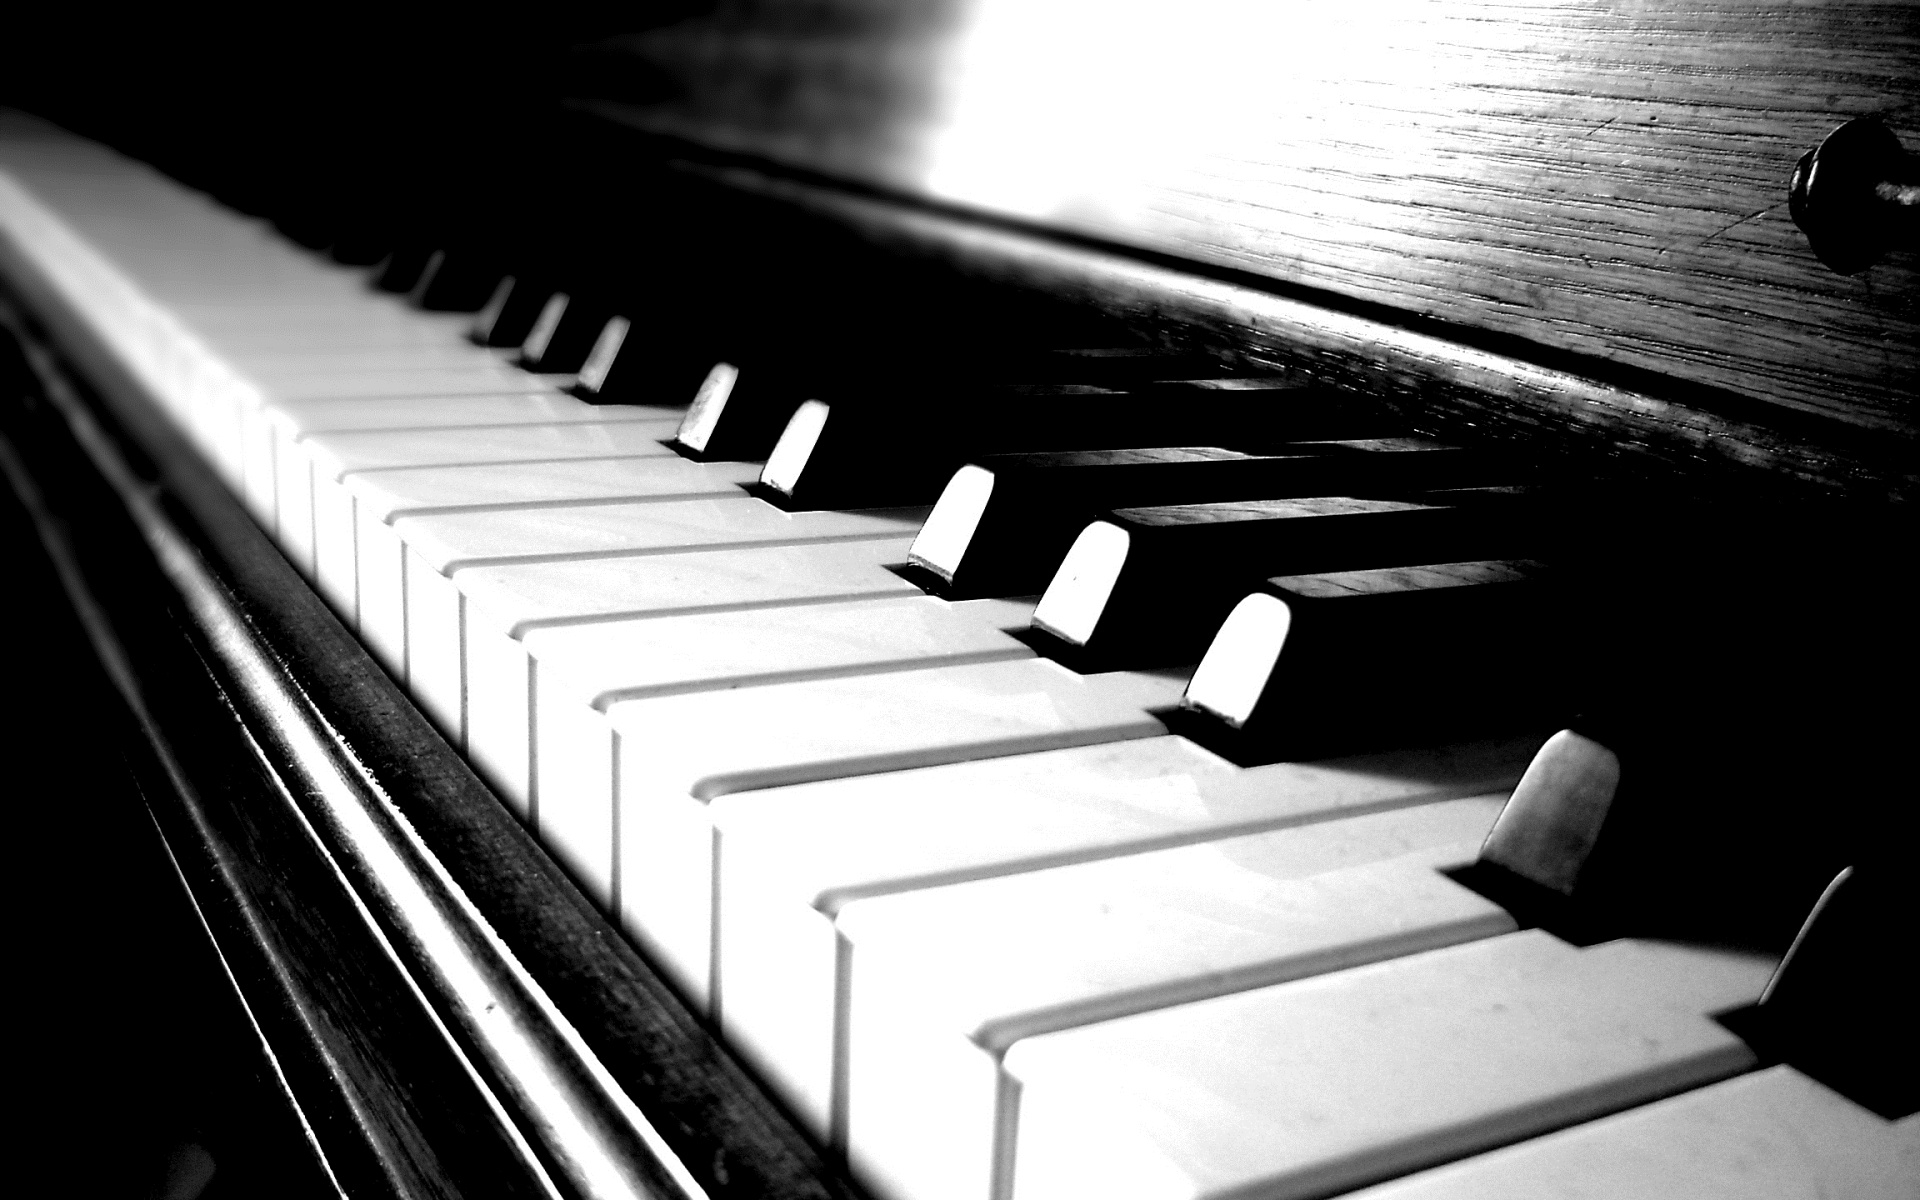 Fortepiano: Monochromatic, Keyboard Instrument, Sound Volume Of Each Note Can Be Varied By Player's Touch. 1920x1200 HD Wallpaper.